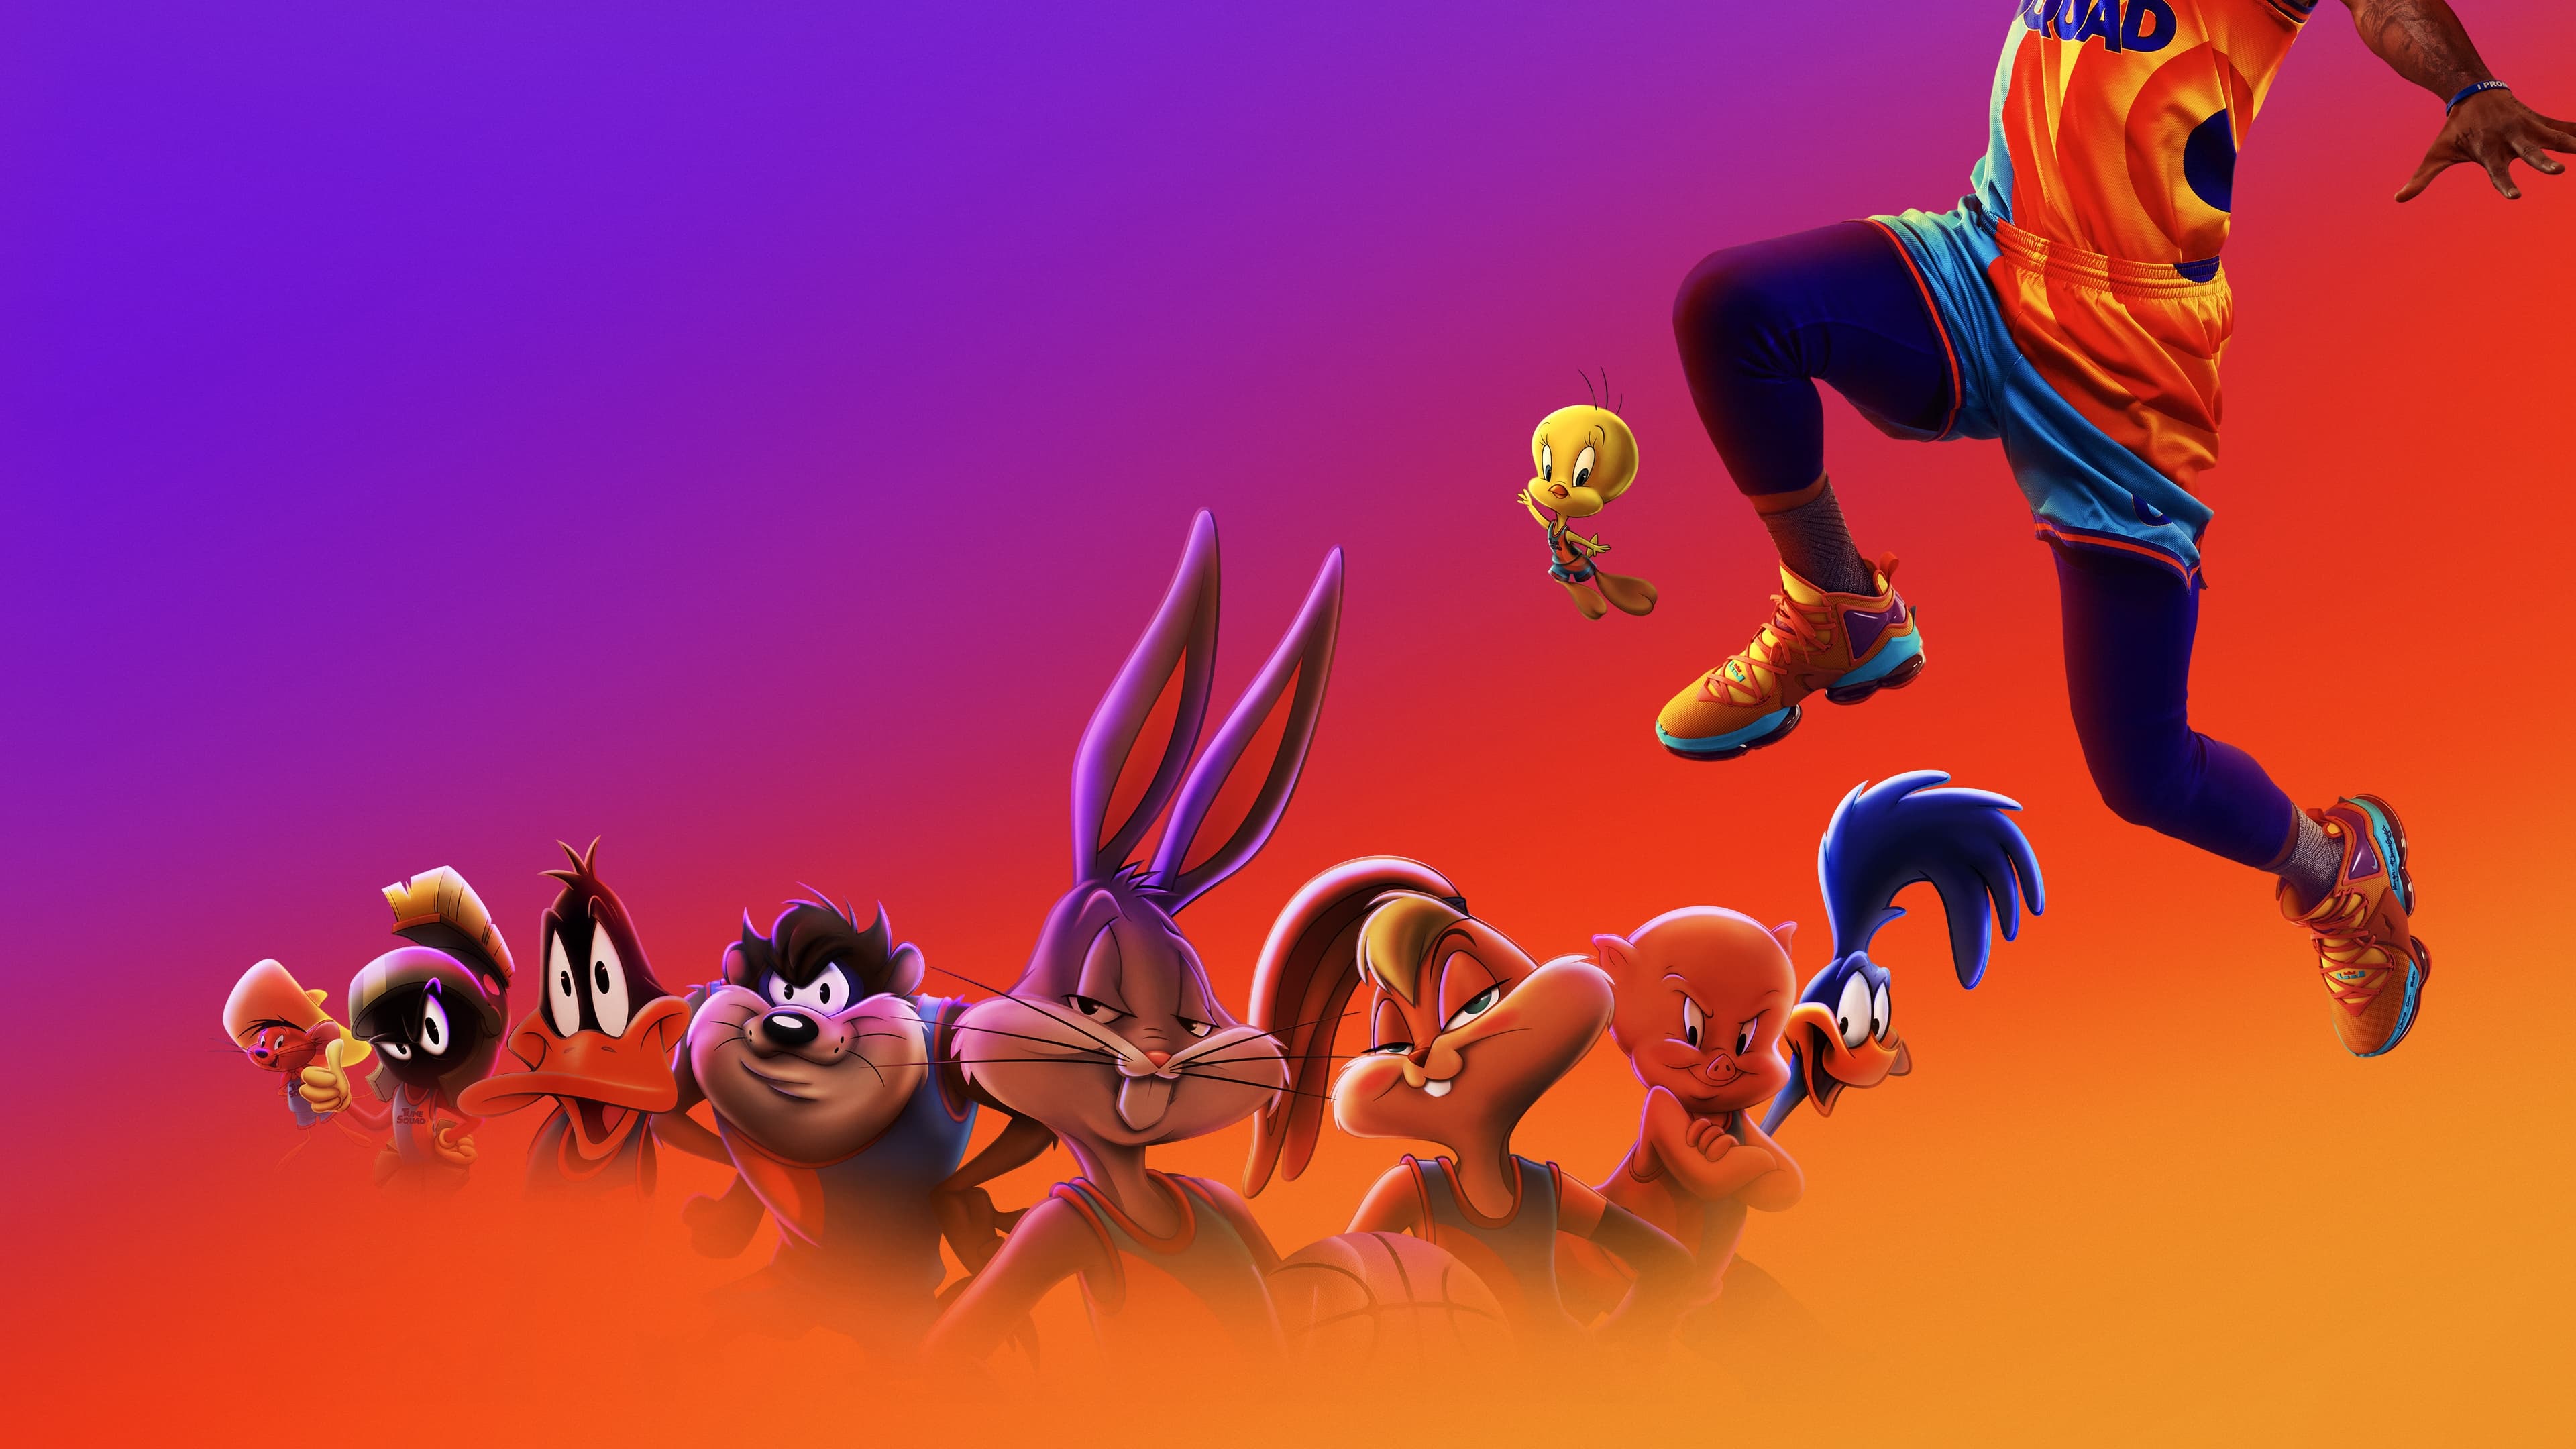 Space Jam 2 Wallpapers